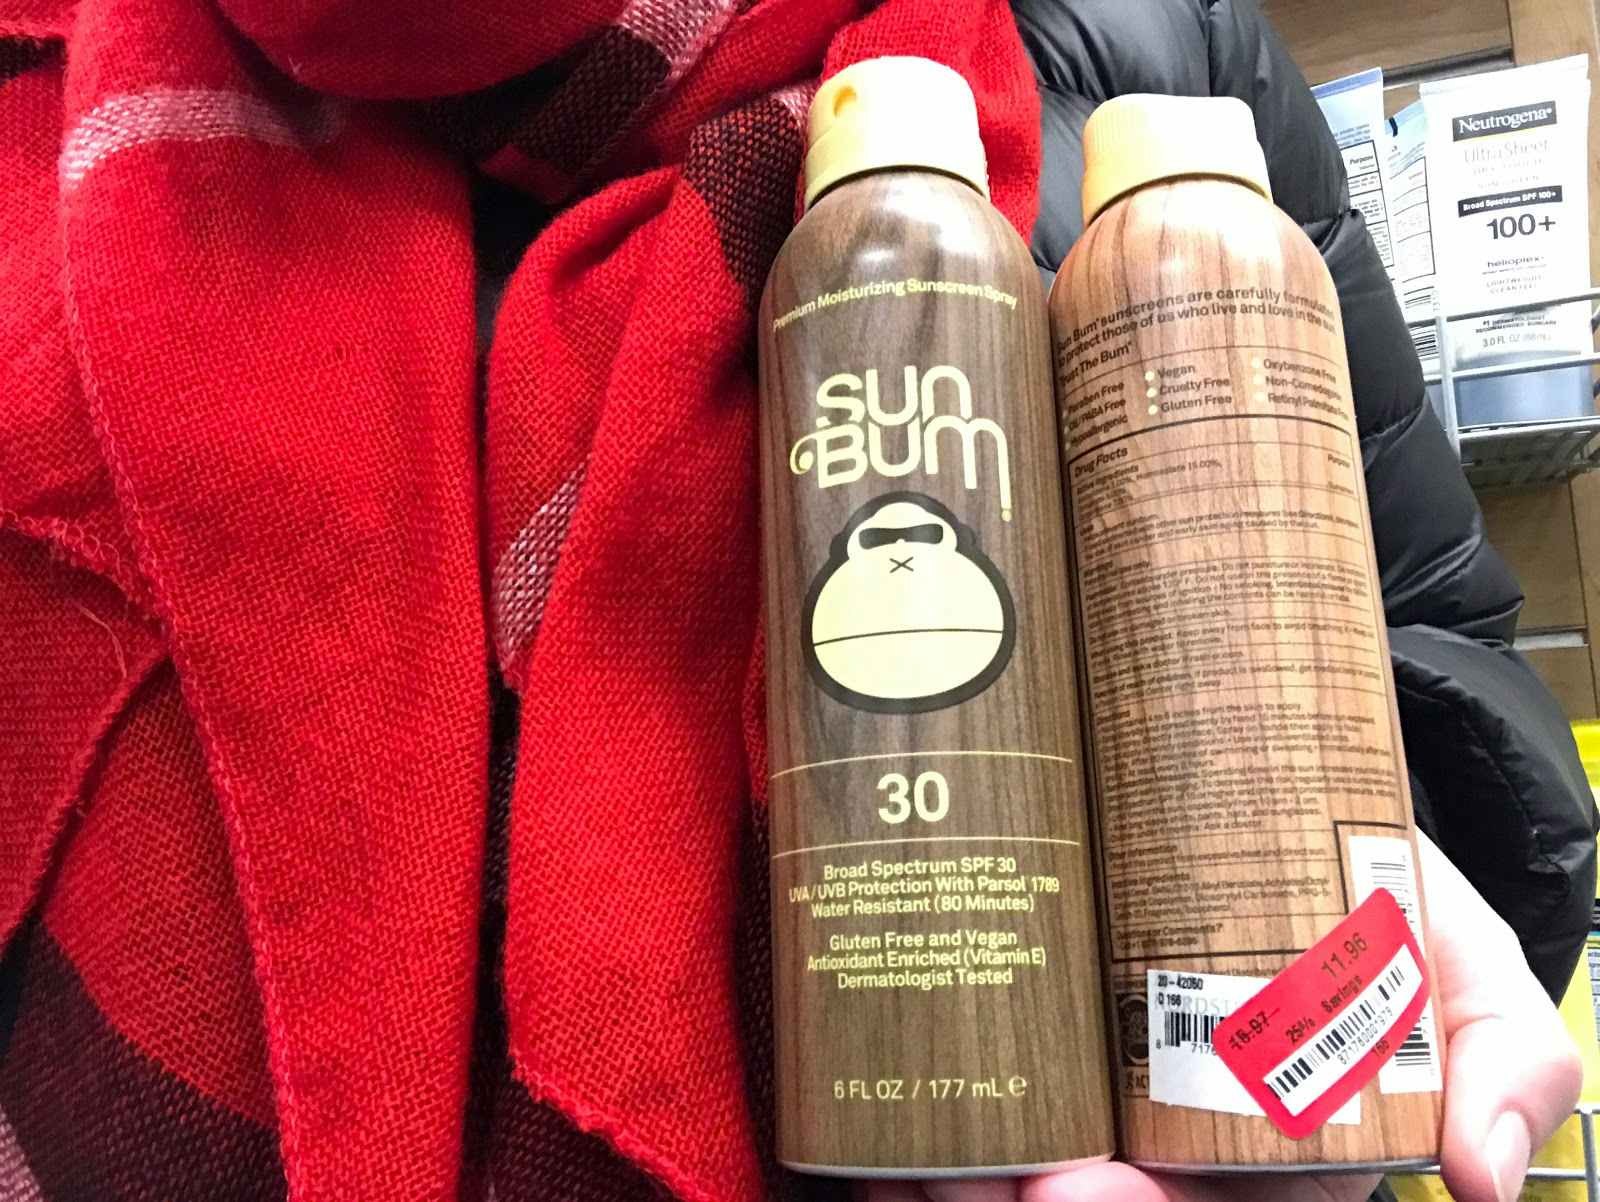 A person wearing winter clothing holding two bottles of Sun bum sun screen. 